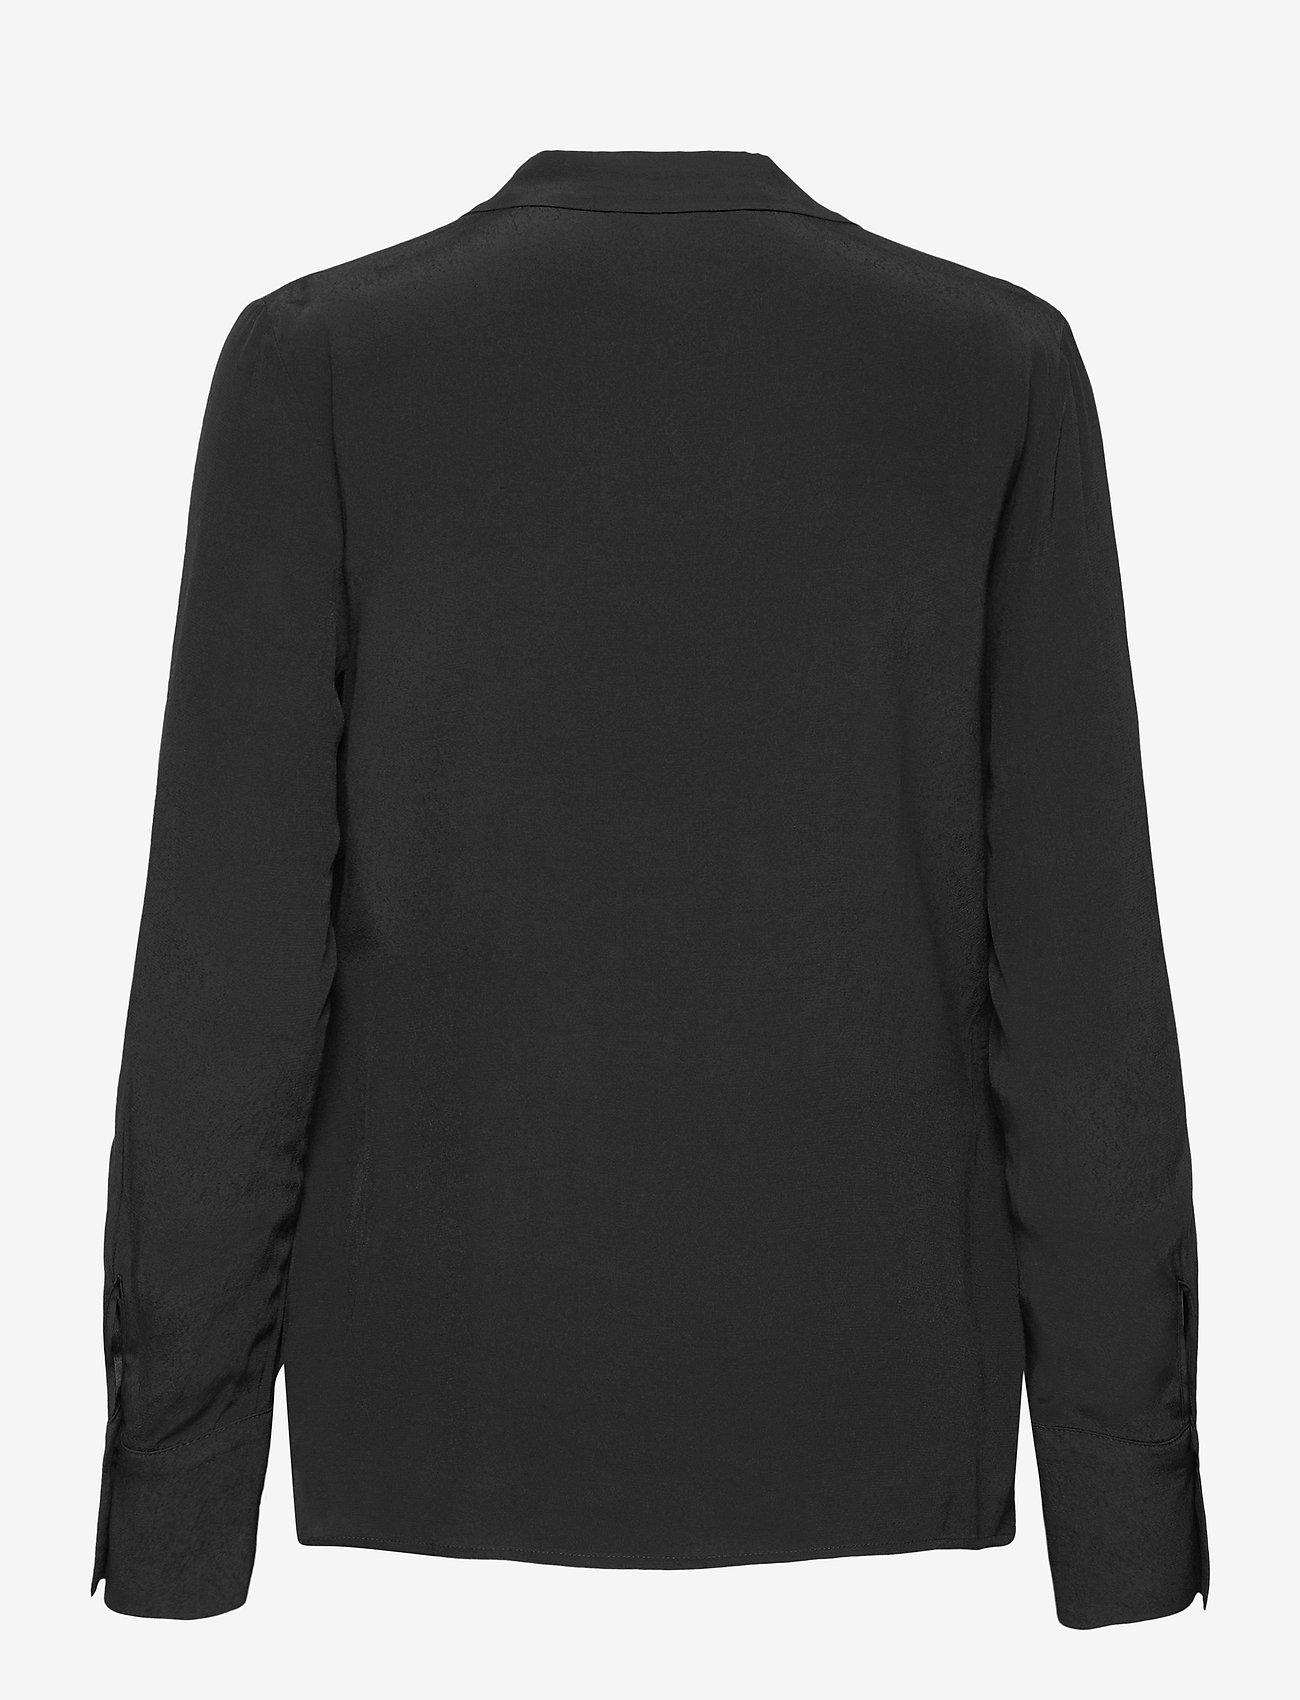 Esprit Collection - Women Blouses woven long sleeve - long-sleeved blouses - black - 1